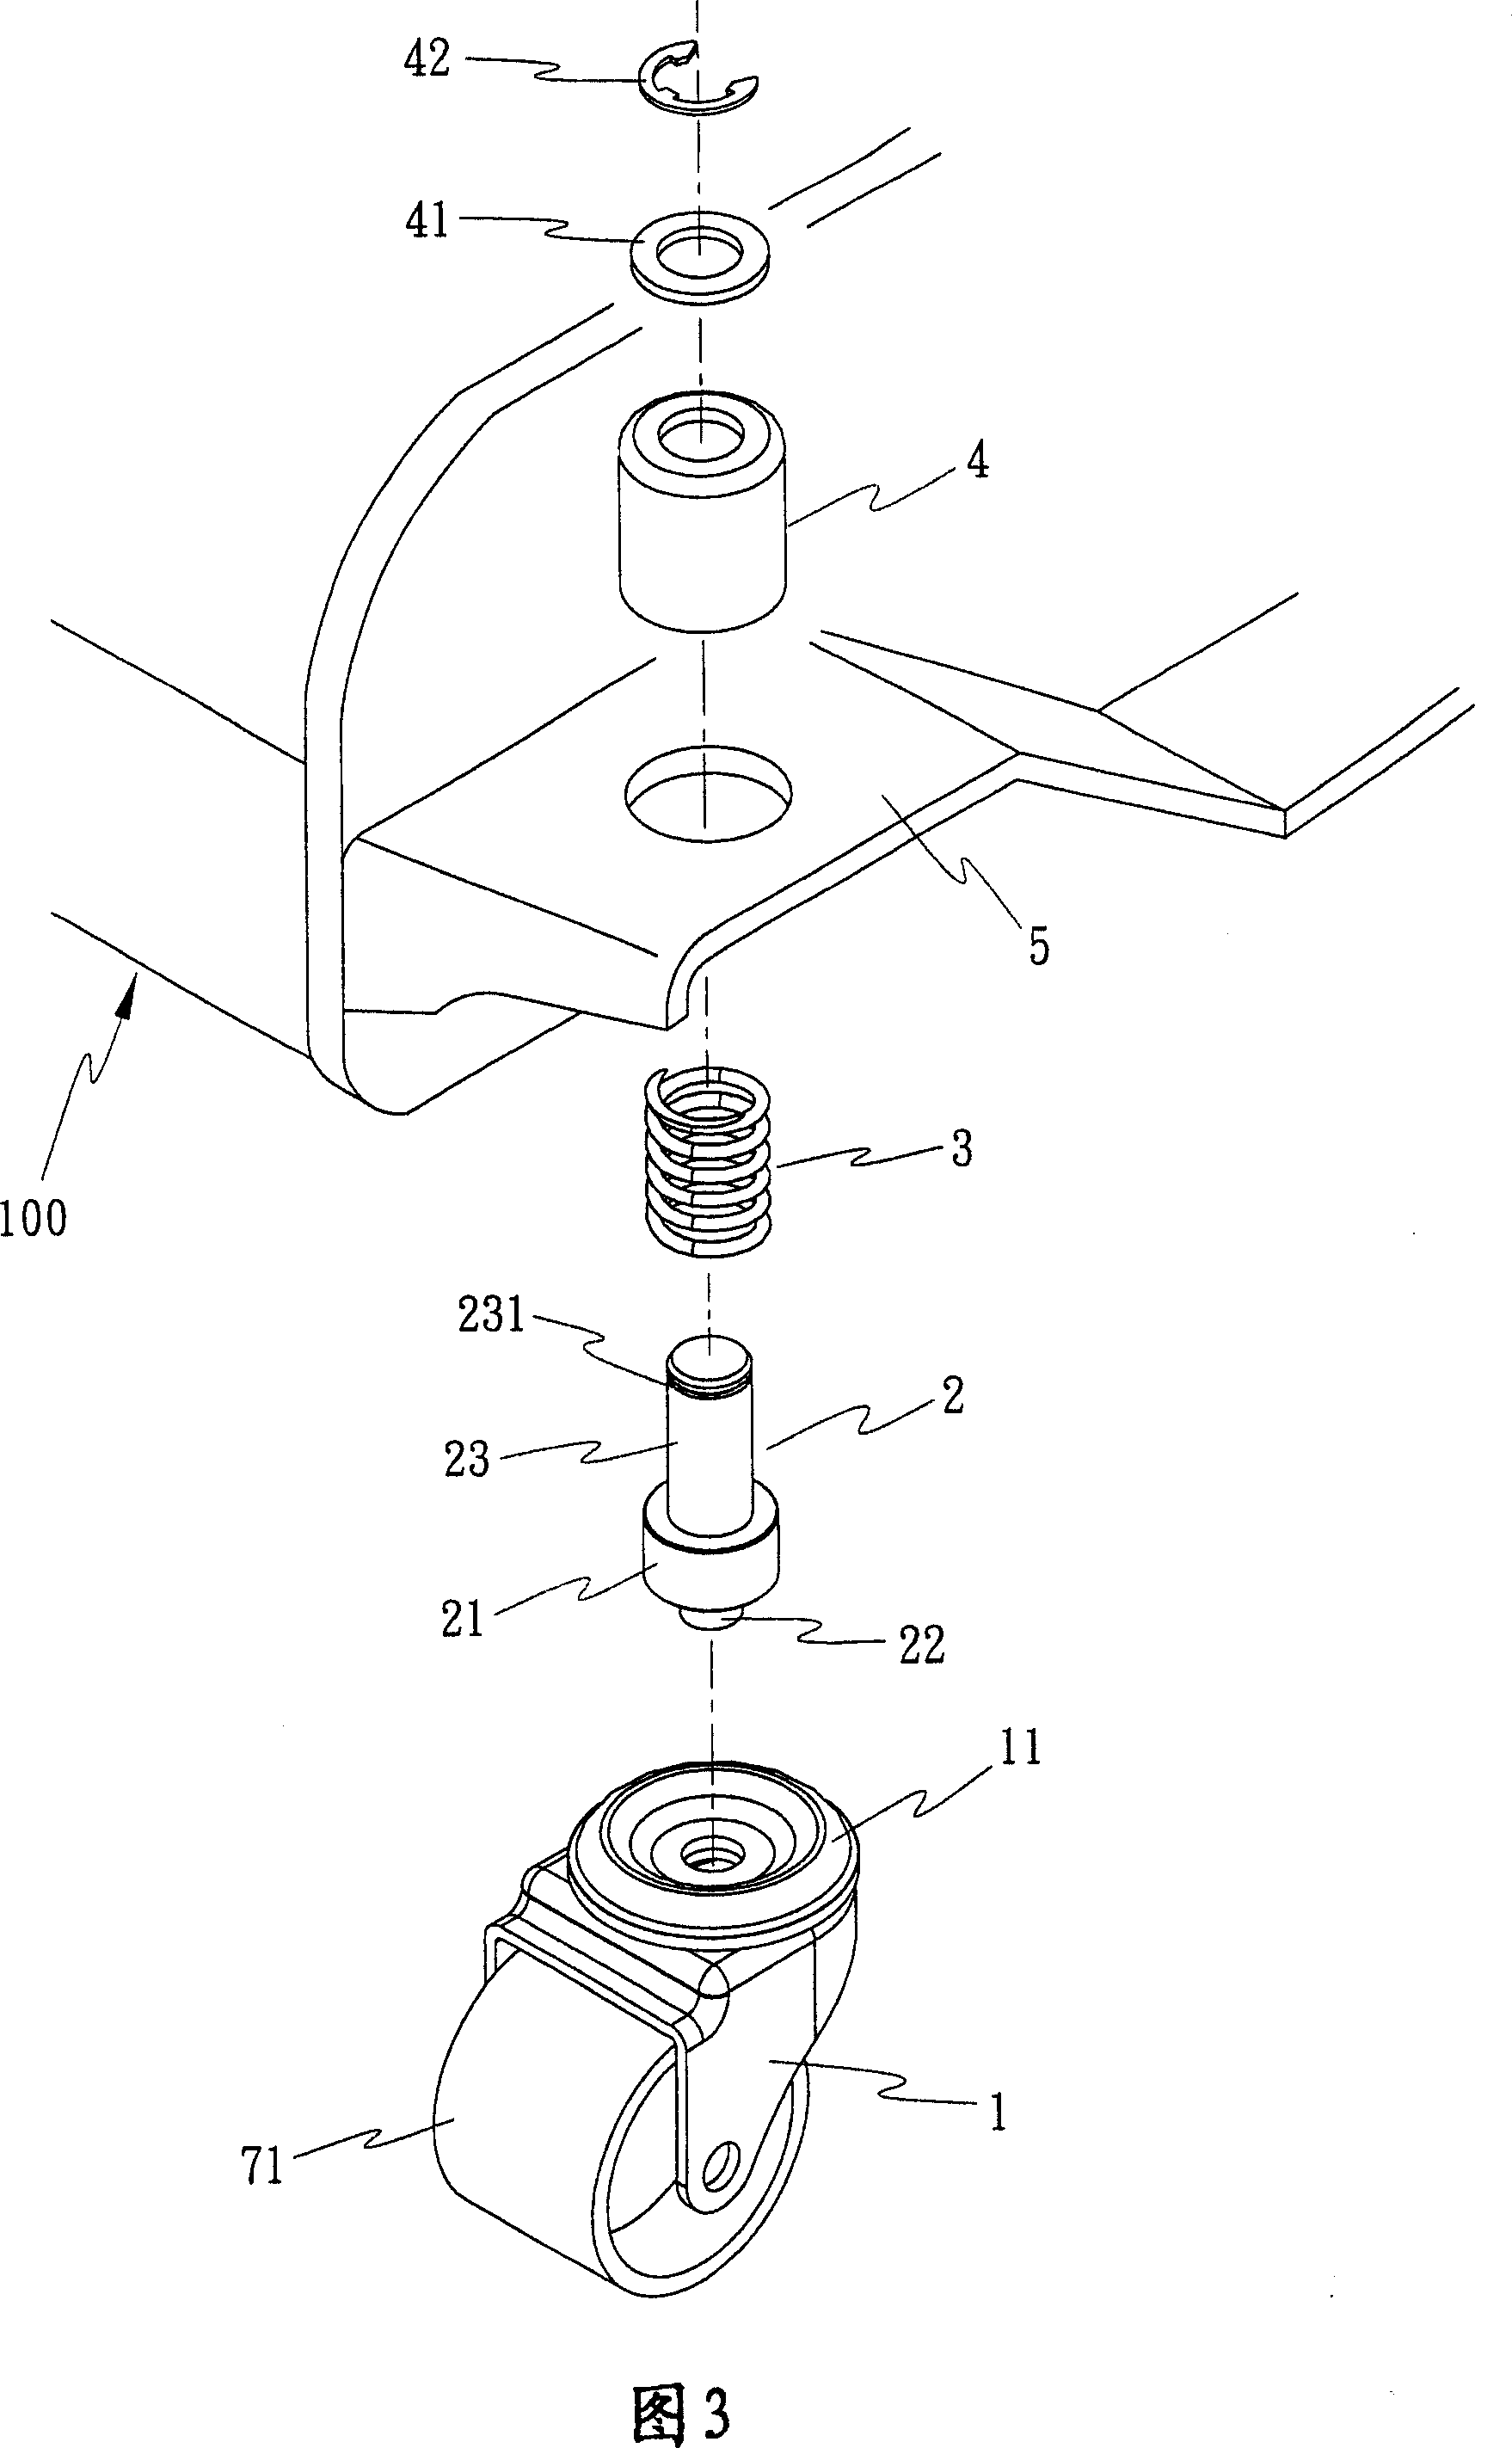 Jack wheel with shock absorber